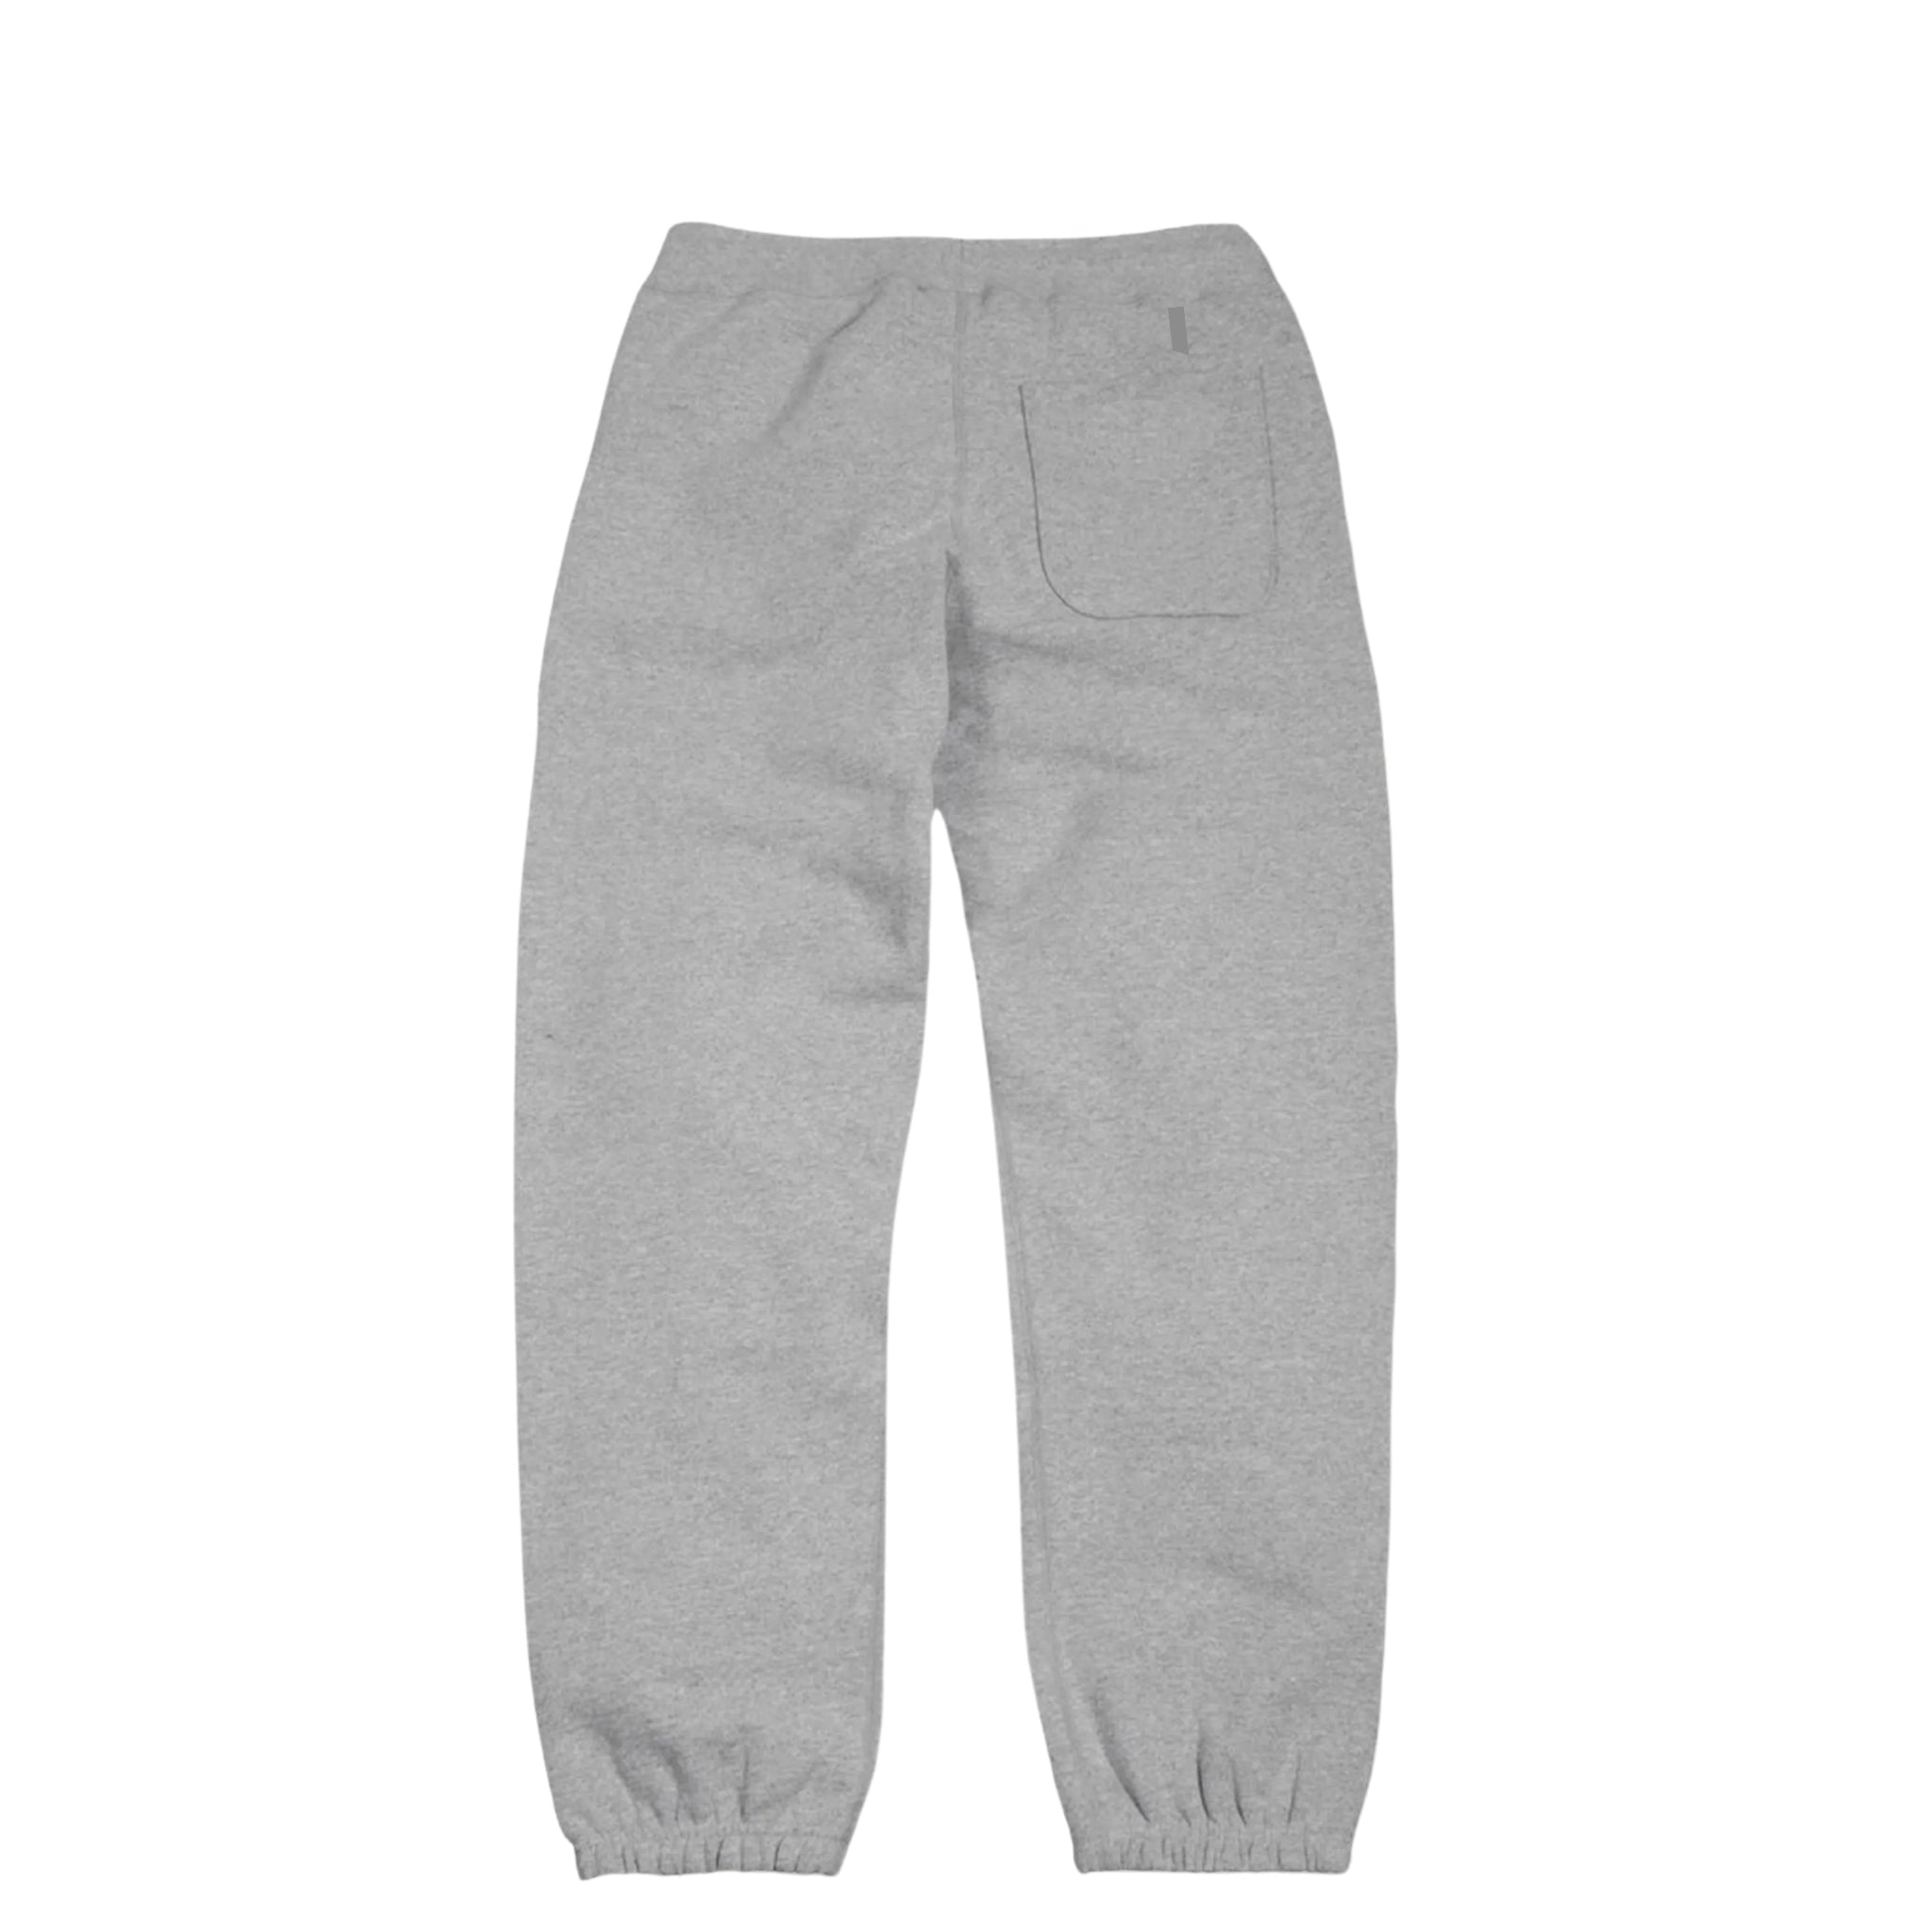 back view of grey heavyweight knit joggers against white background